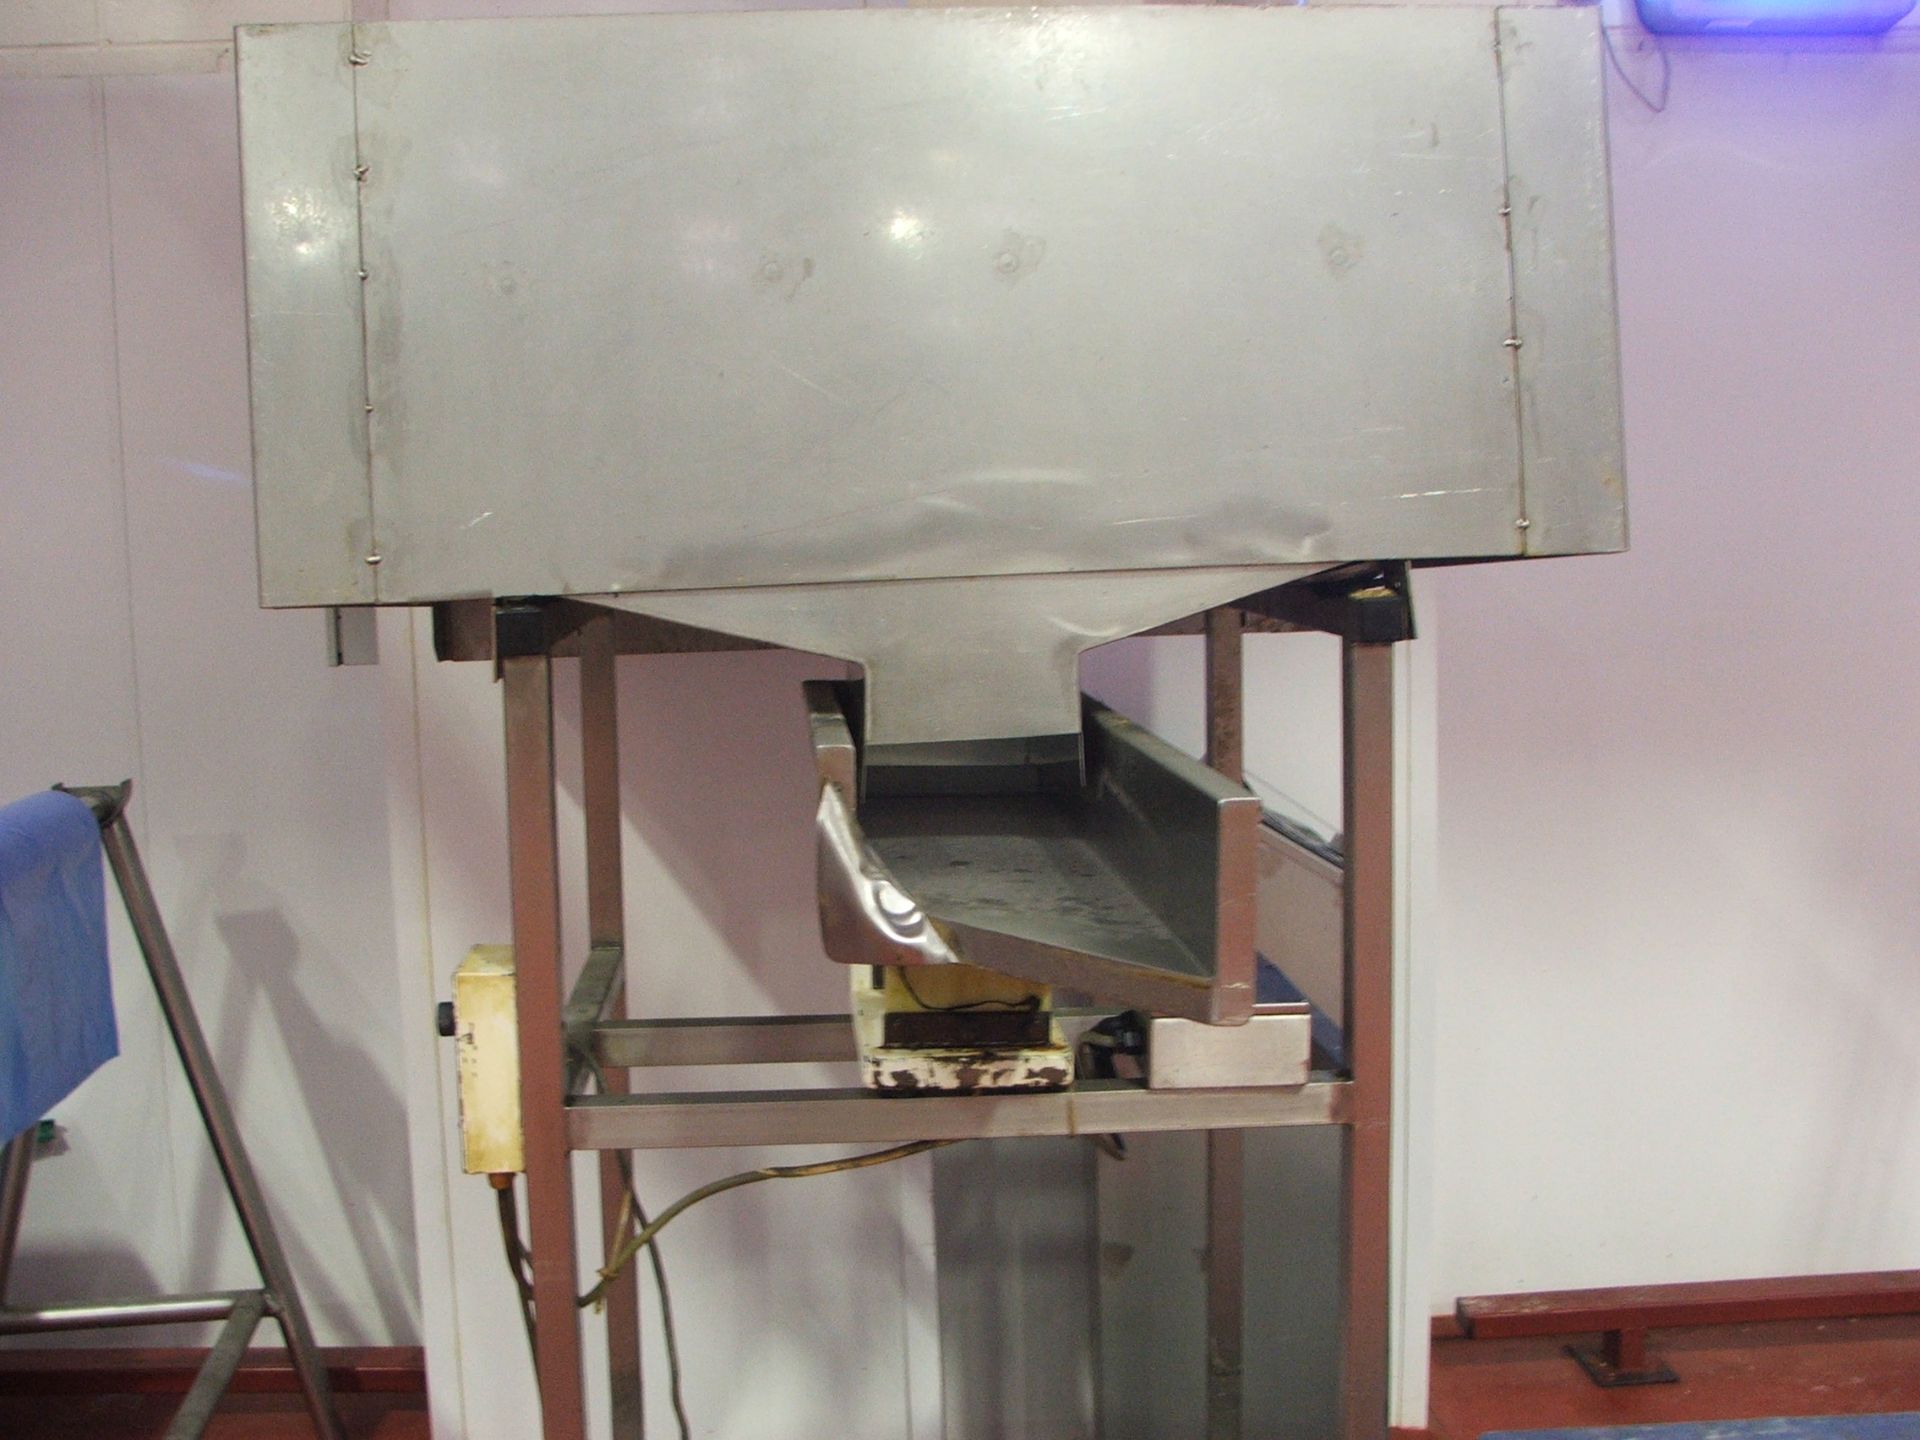 S/STEEL VIBRATORY HOPPER FEED UNIT ON STEEL STAND 1 MTR X 1 MTR X 500 SPARES OR REPAIRS REQUIRES - Image 2 of 2